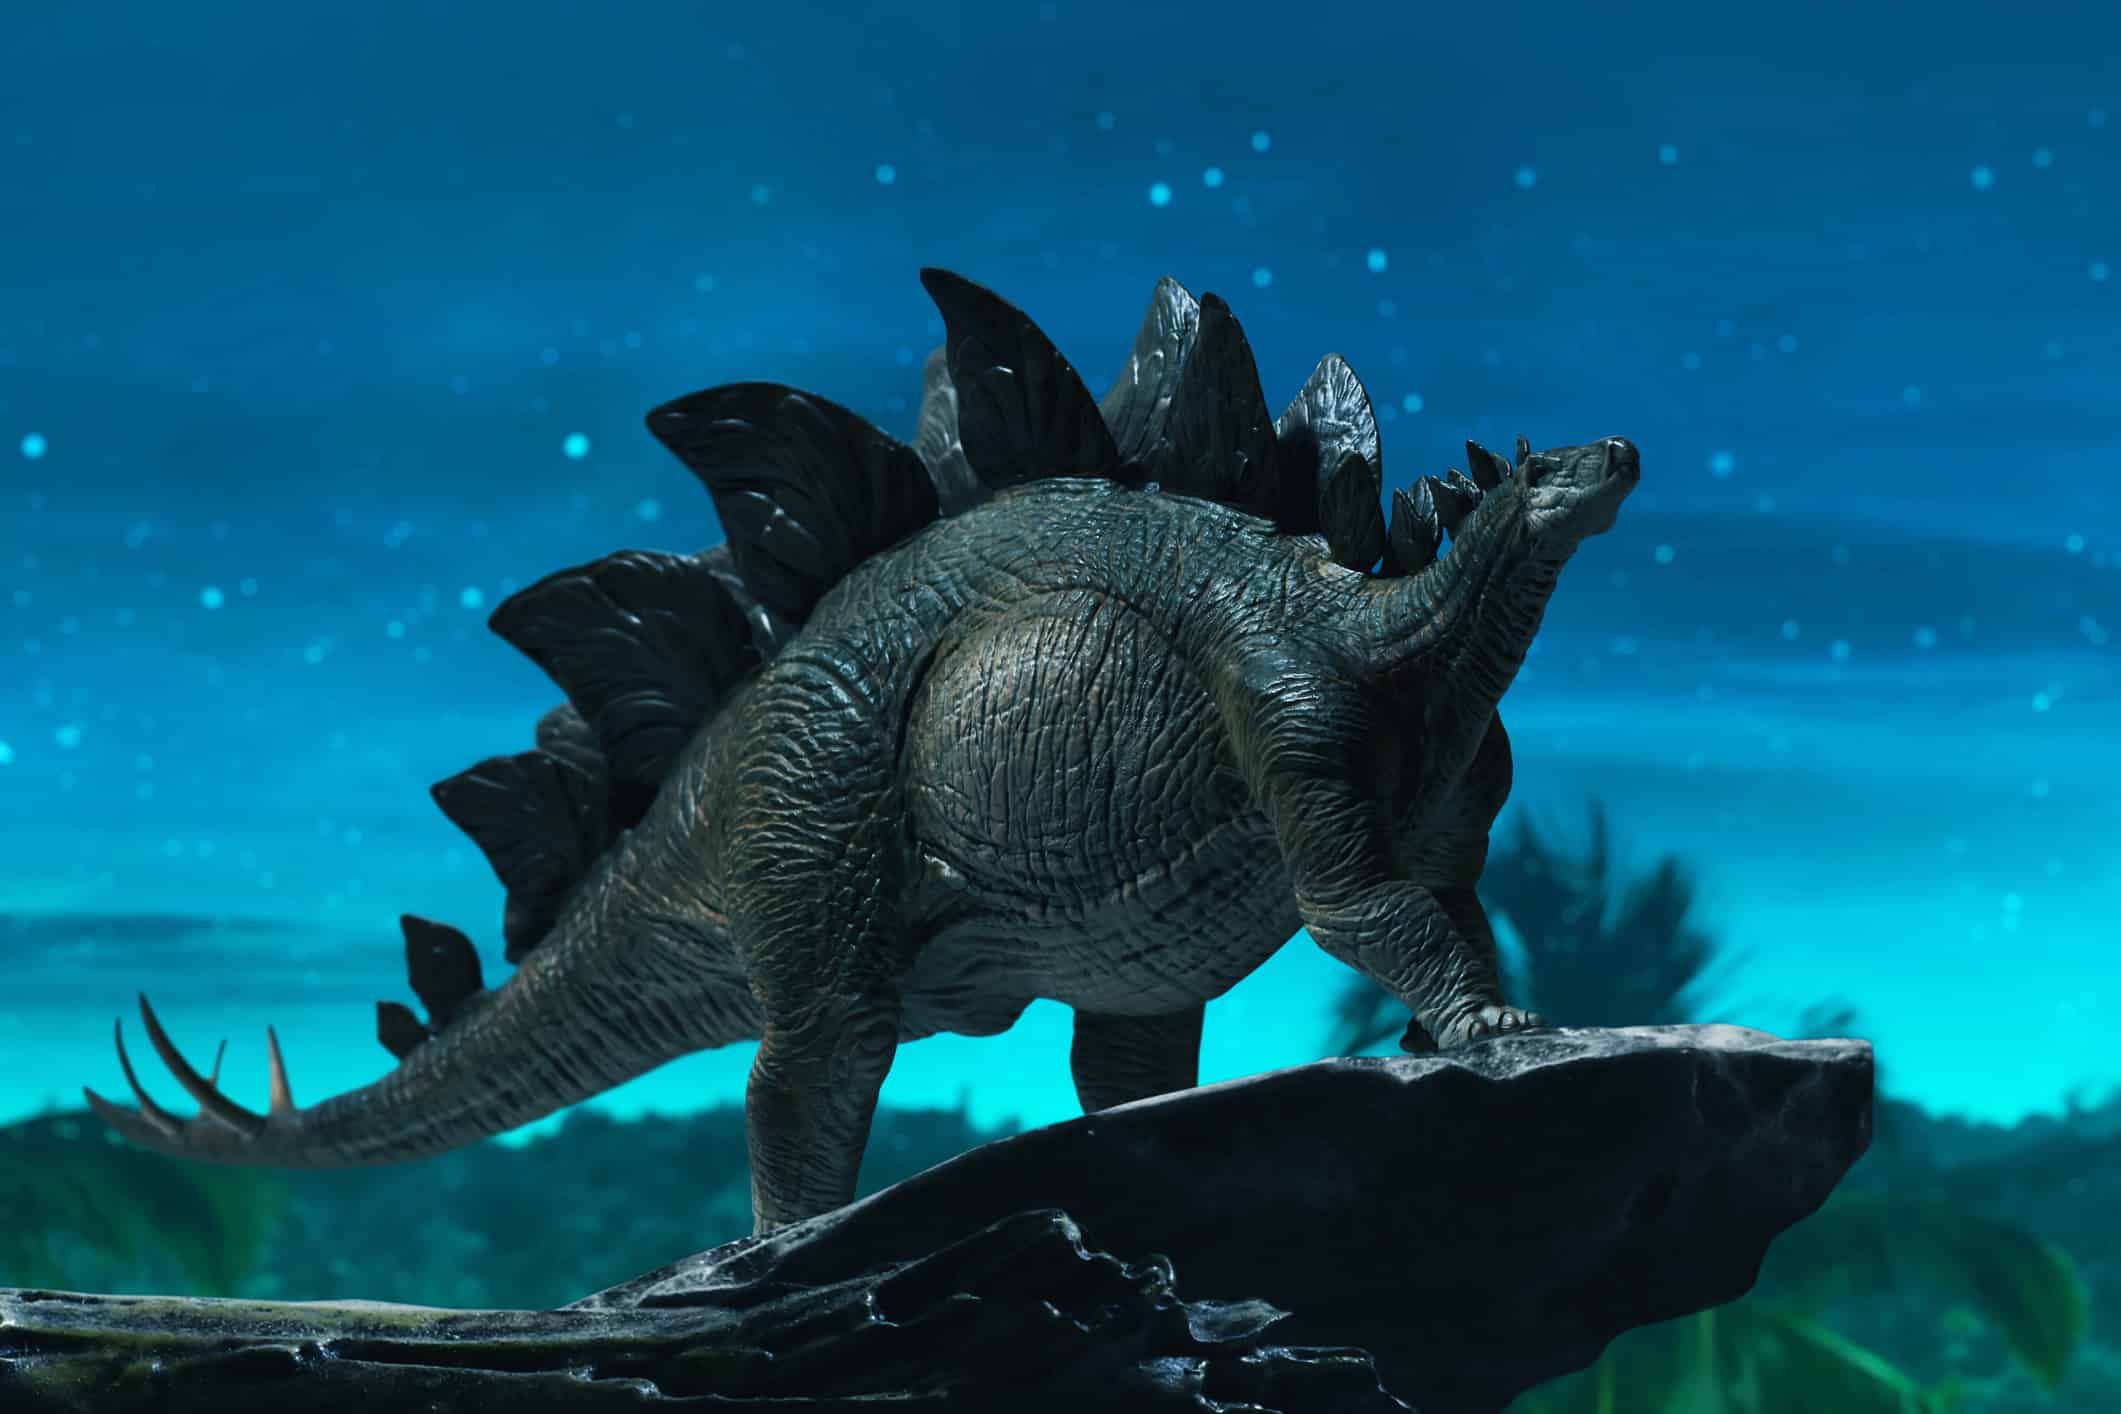 A stegosaurus model stands on a cliff at nighttime. 